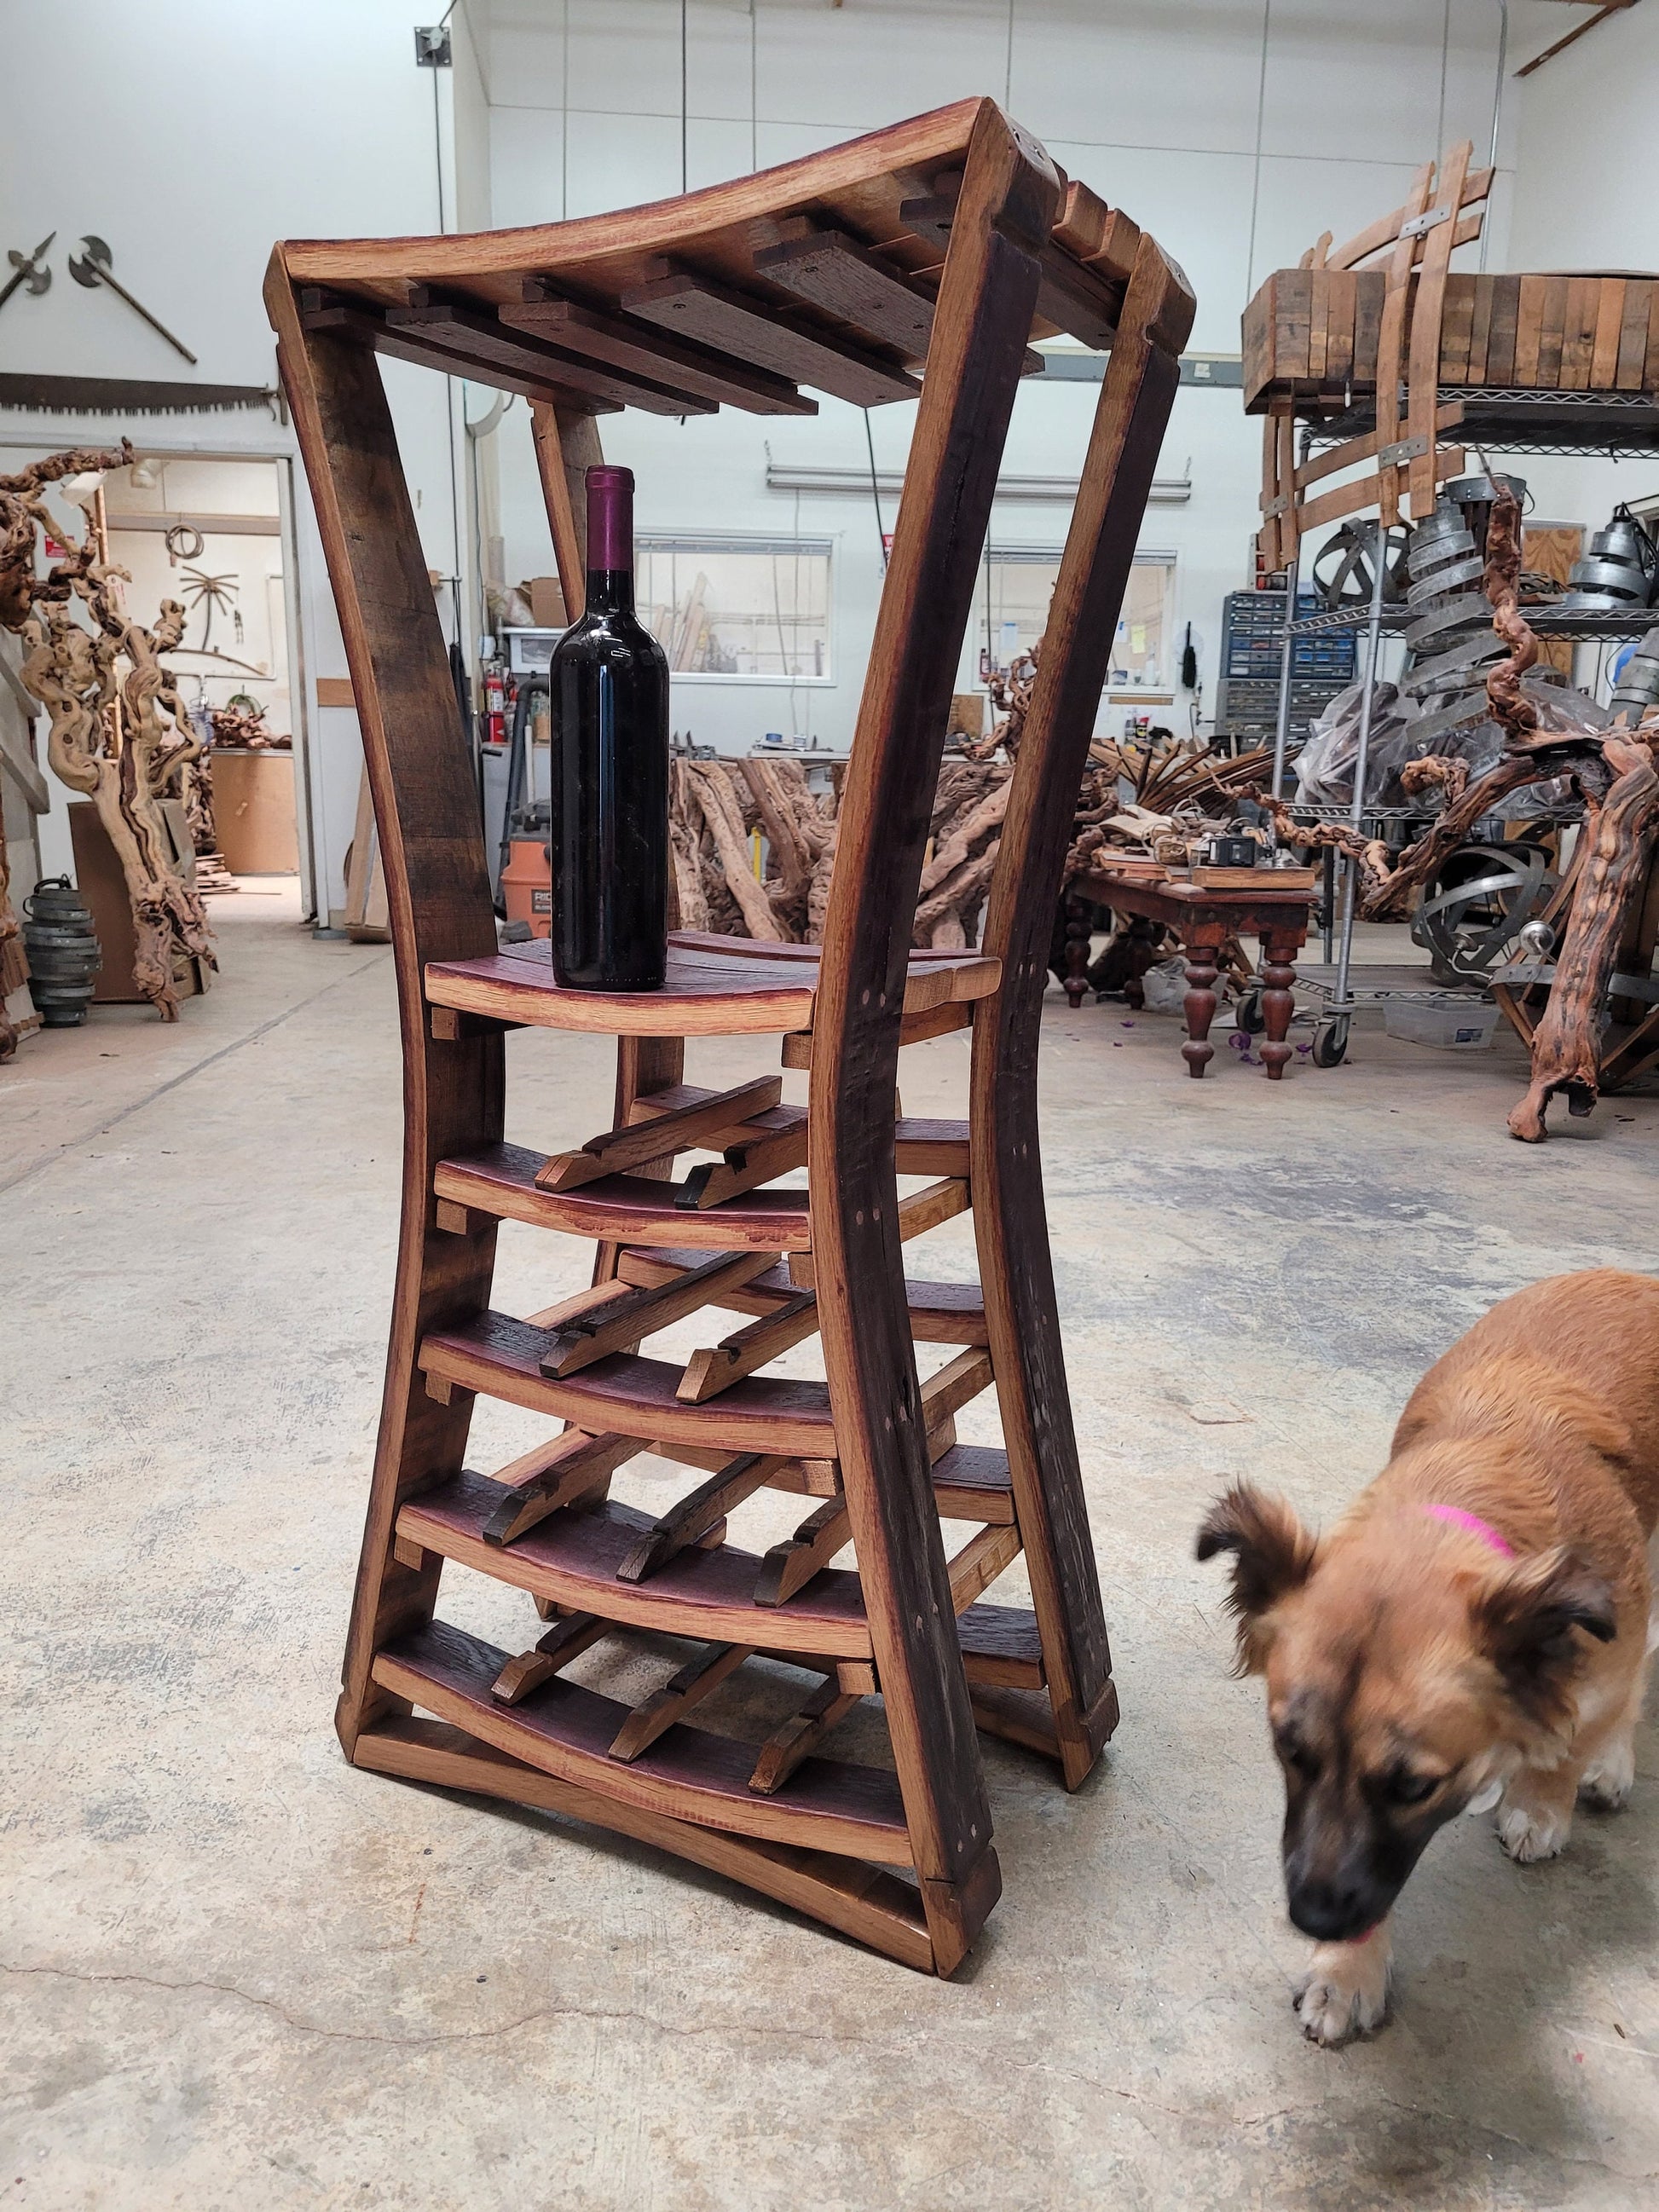 SALE Large Narrow Wine and Glass Rack - Estrecho - Made from retired California wine barrels. 100% Recycled! 052722-33